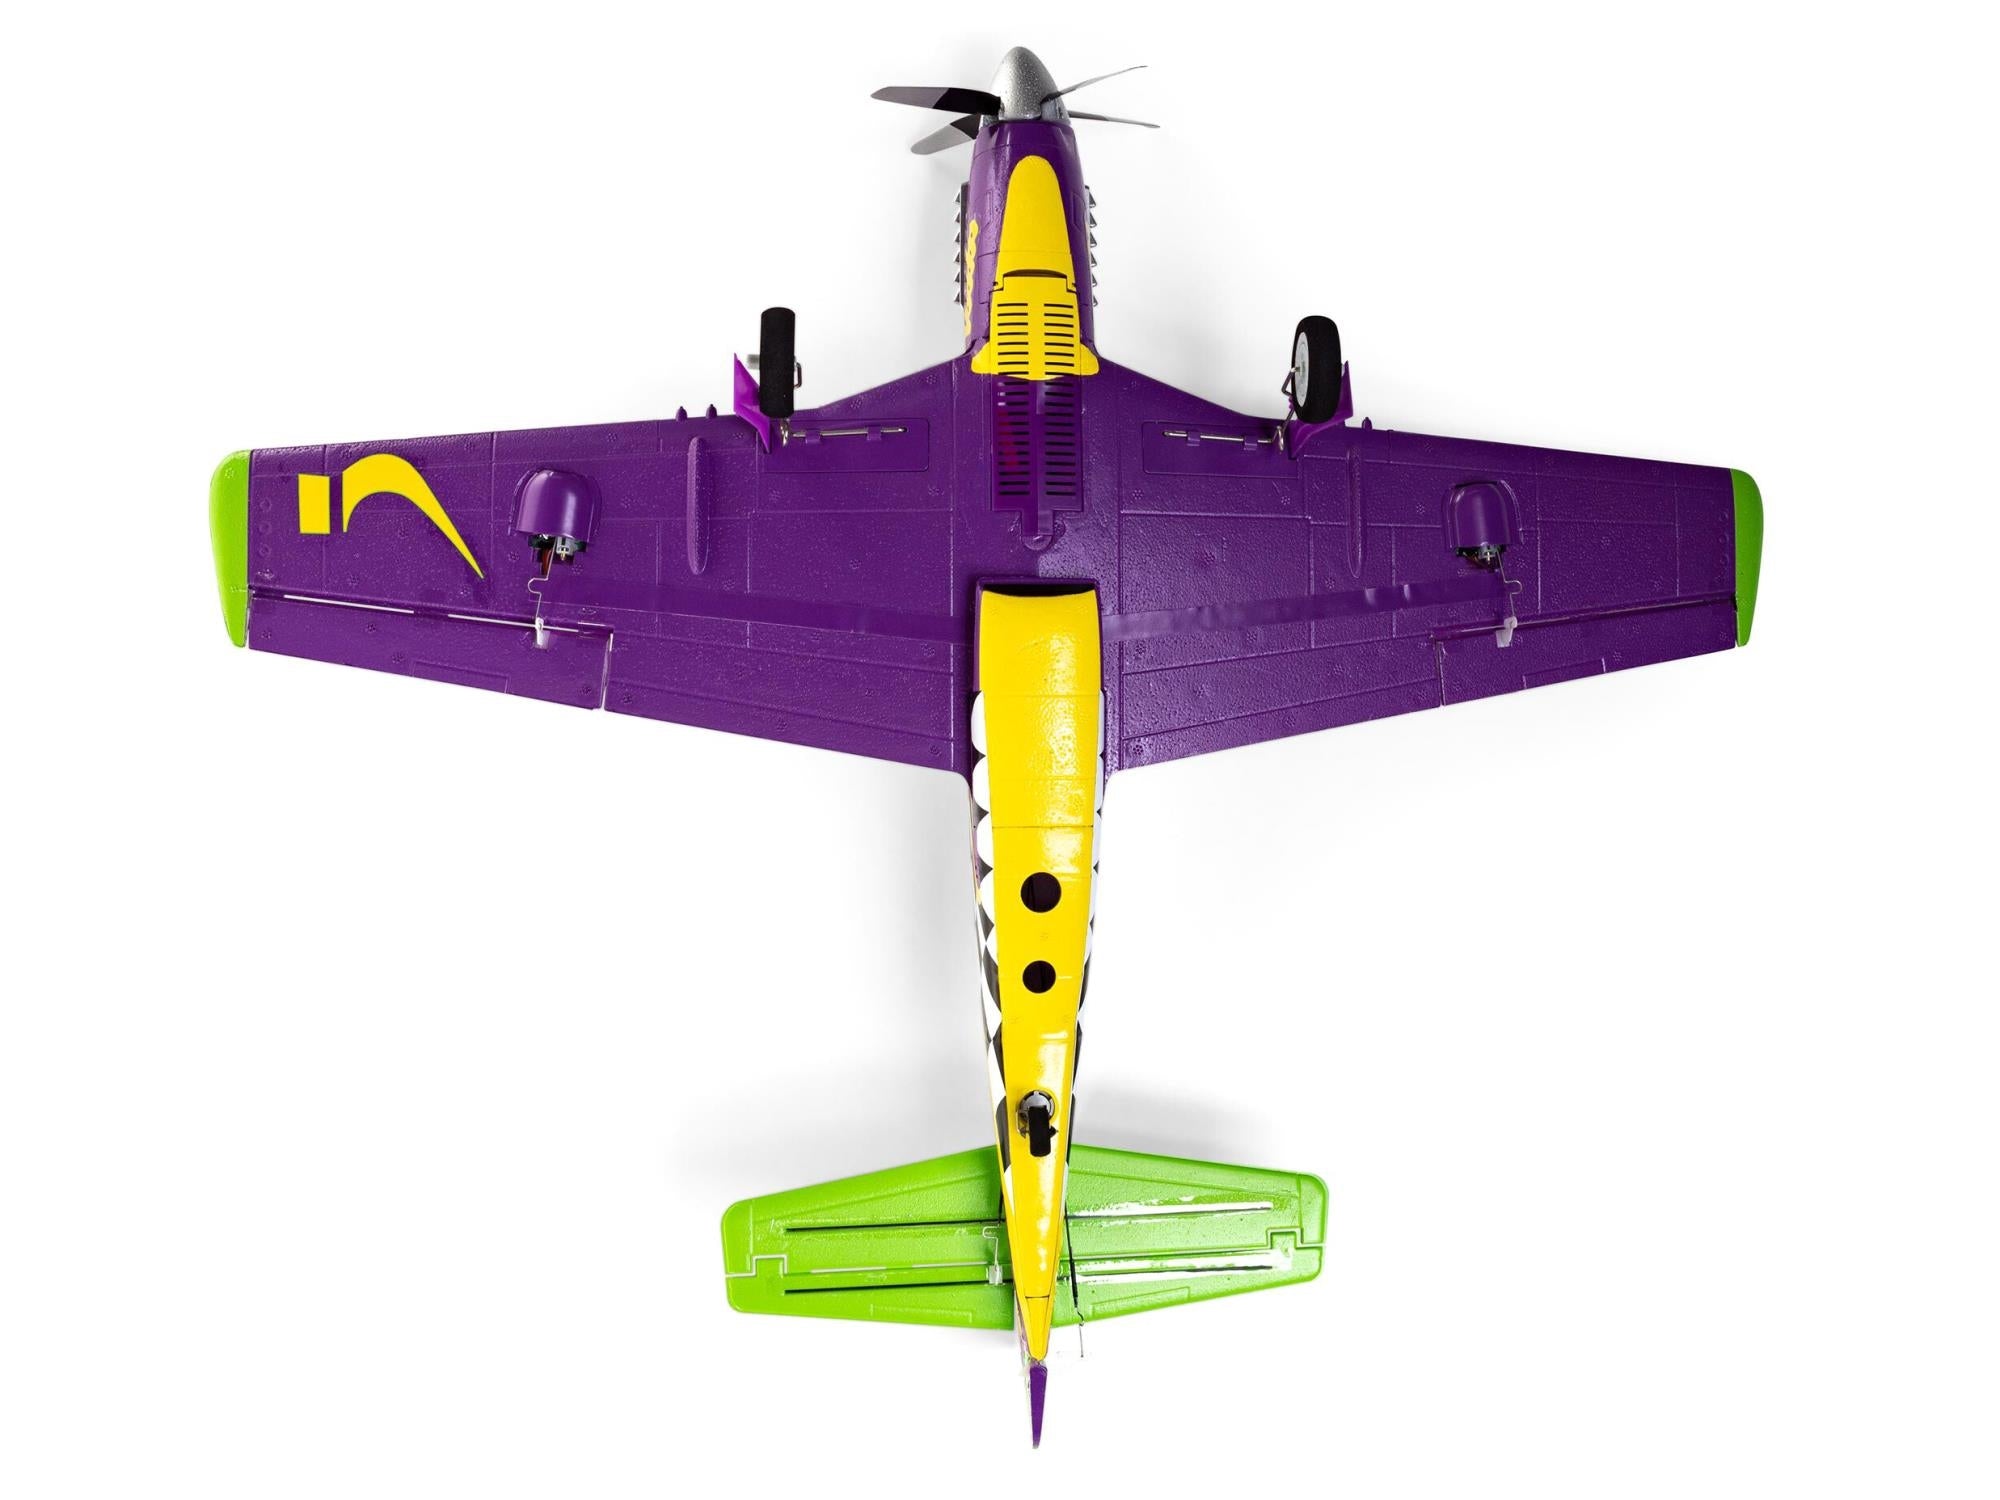 E-Flite UMX P-51D Voodoo BNF Basic with AS3X and SAFE Select EFLU4350